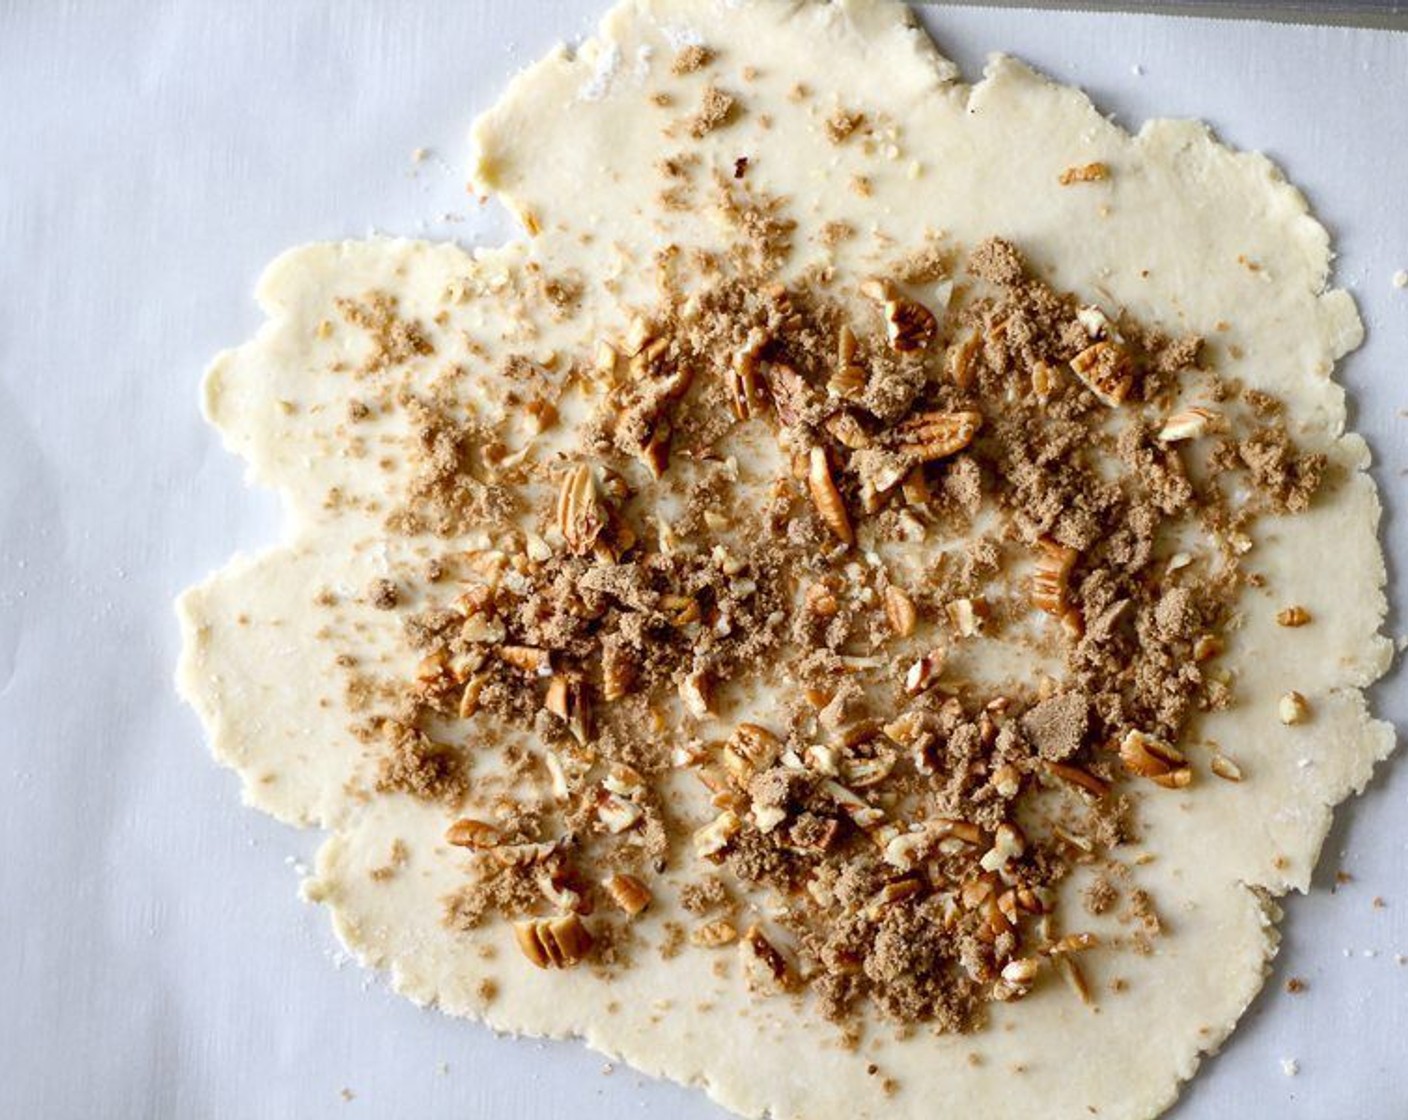 step 8 Transfer the dough circle to parchment-lined baking sheet. Sprinkle dough with the Pecans (1/4 cup) and Brown Sugar (2 Tbsp), leaving 1/2 inch bare.